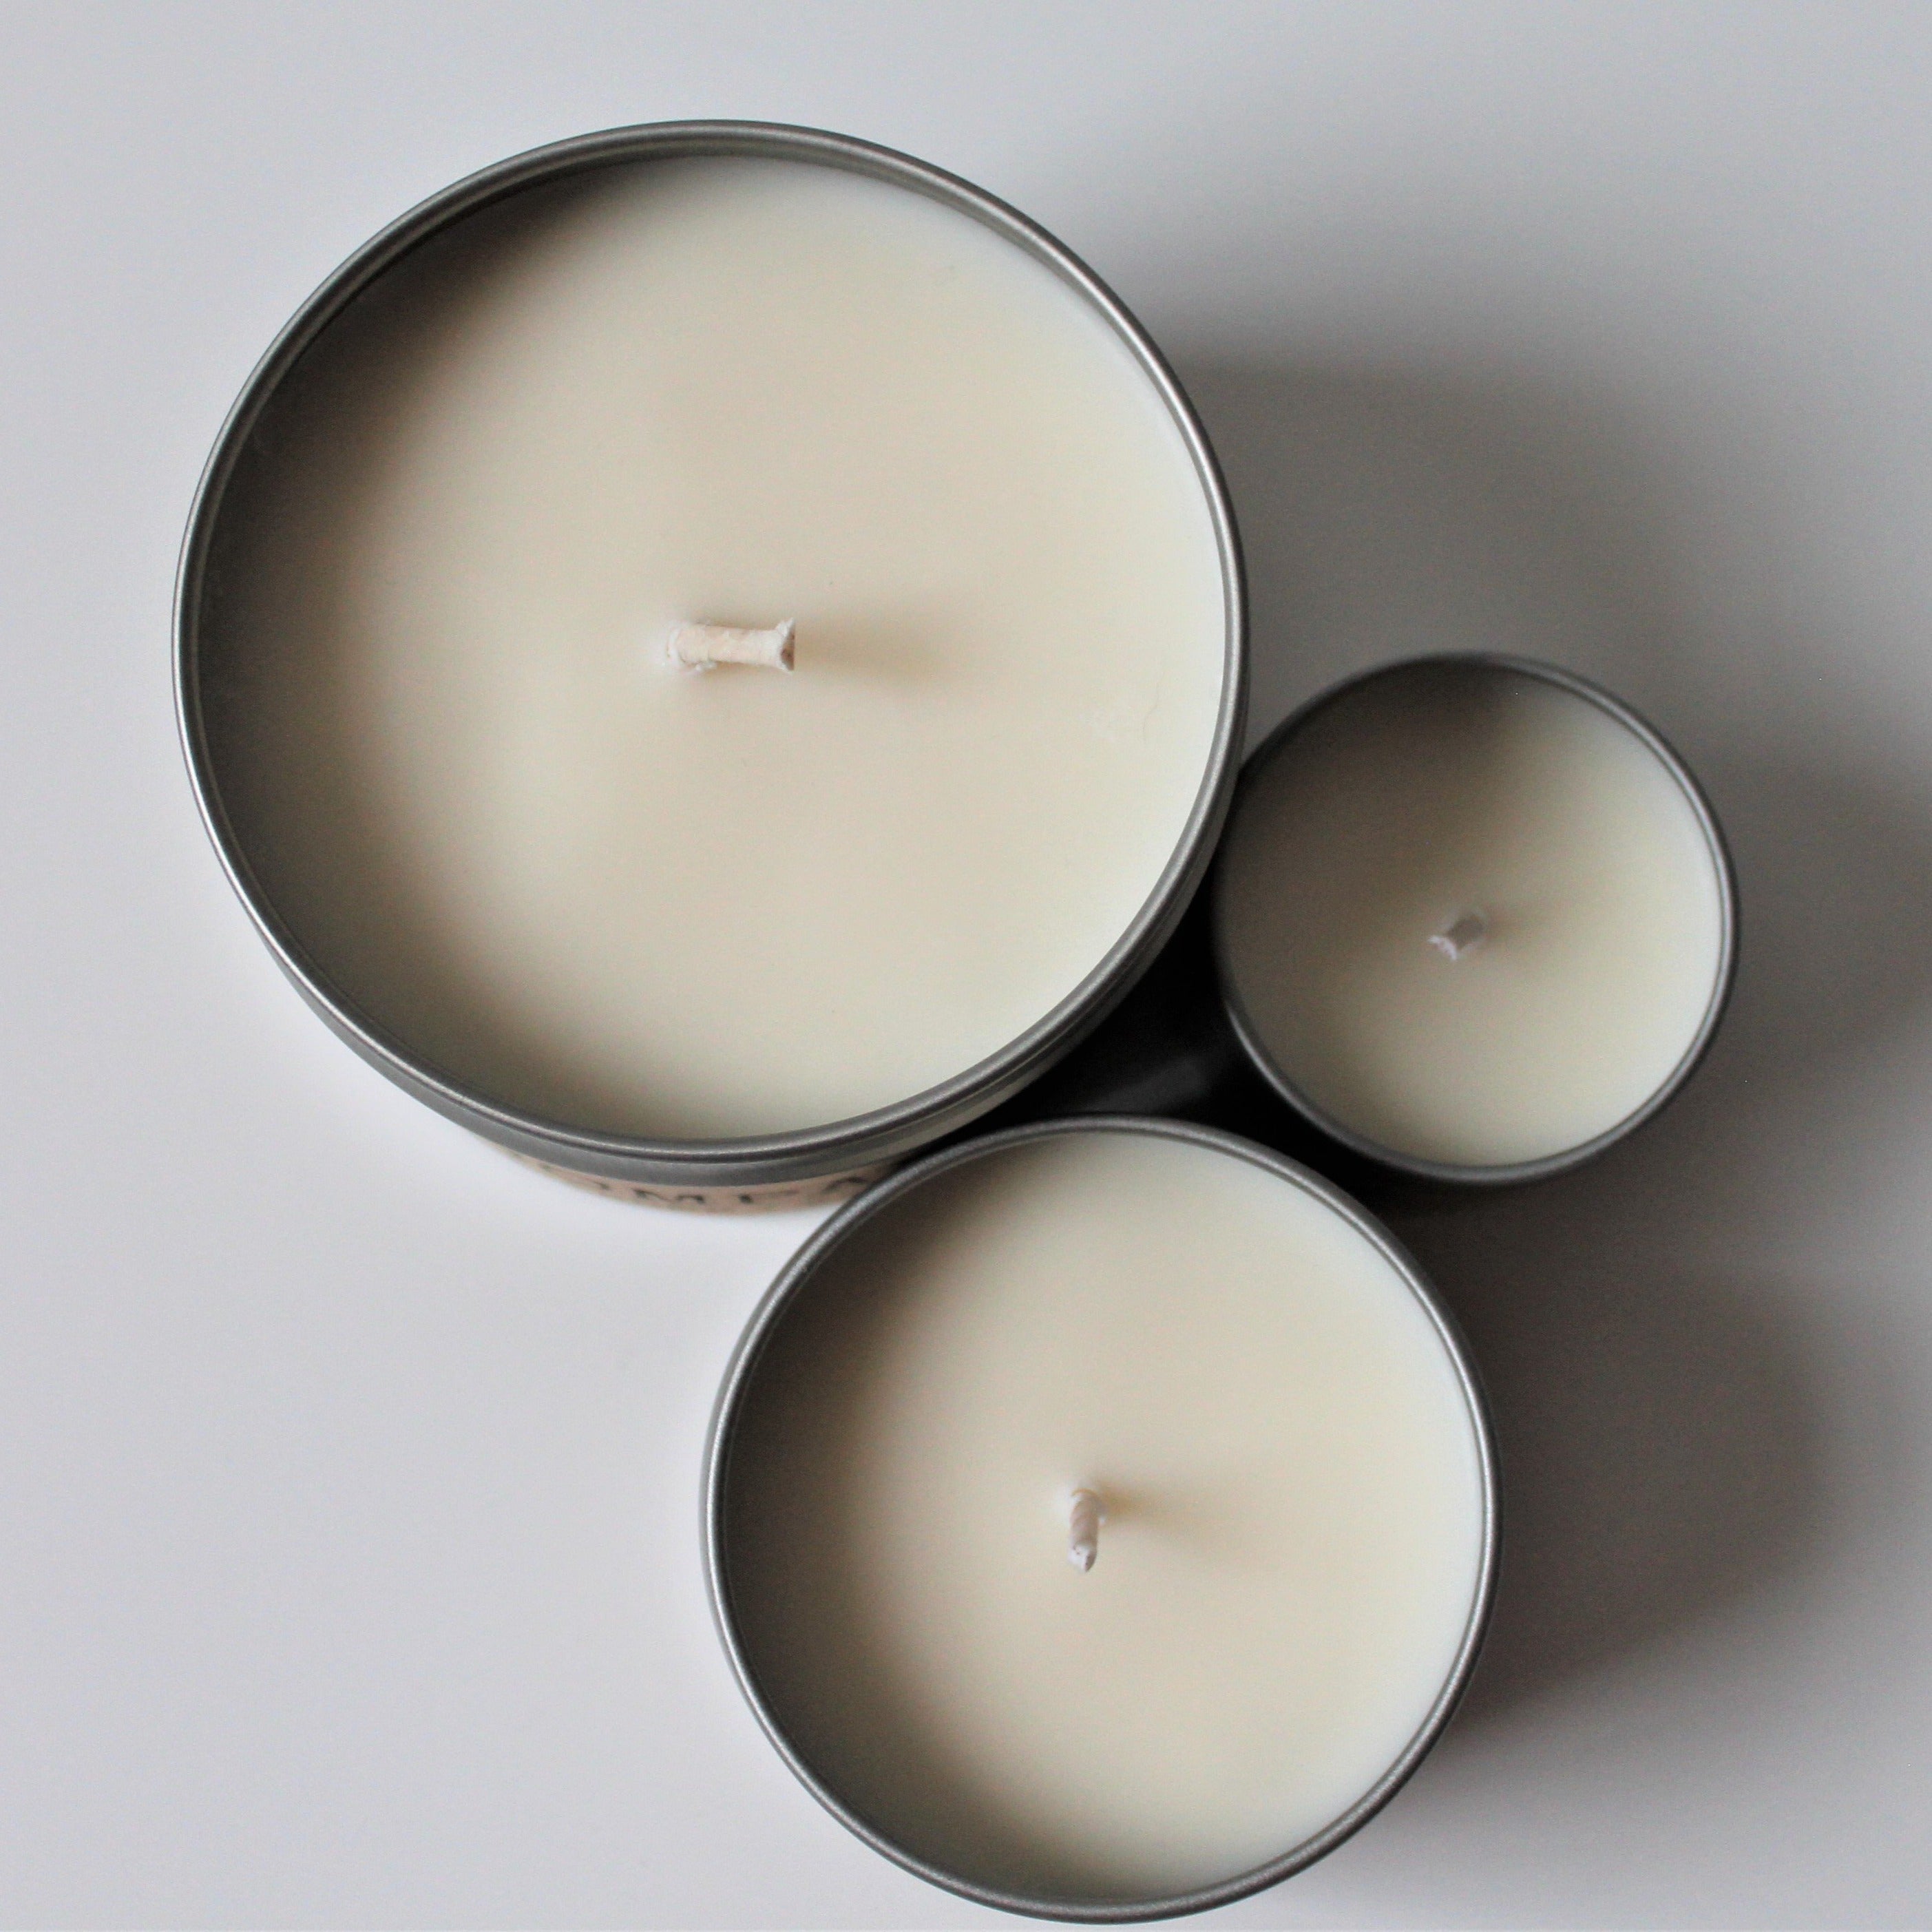 Rambler Soy Candle, 16 oz Soy Candle